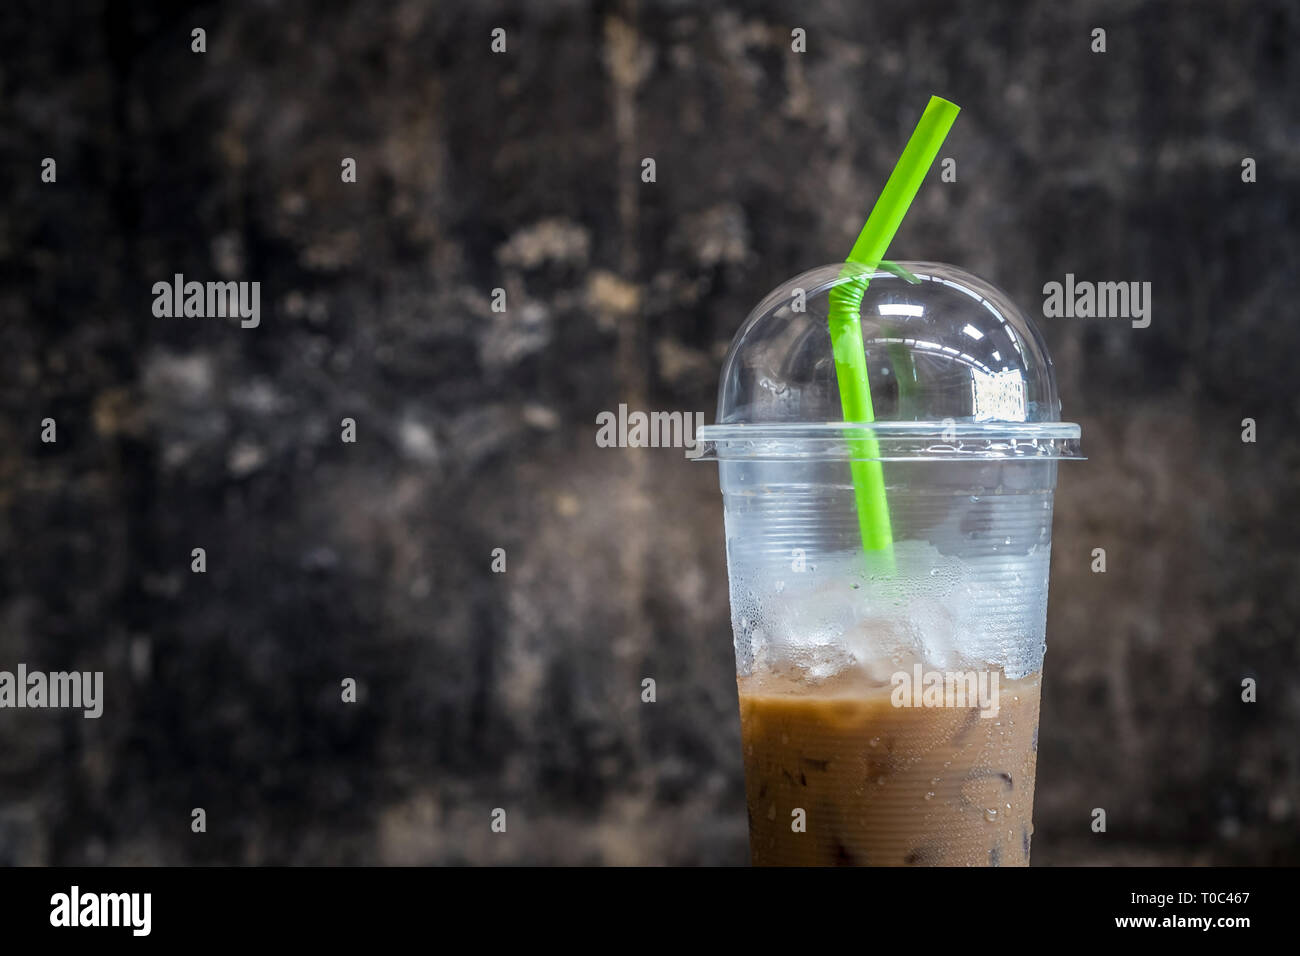 Plastic materials use, show transparent cup and green straw with partly consumed iced coffee inside. Stock Photo